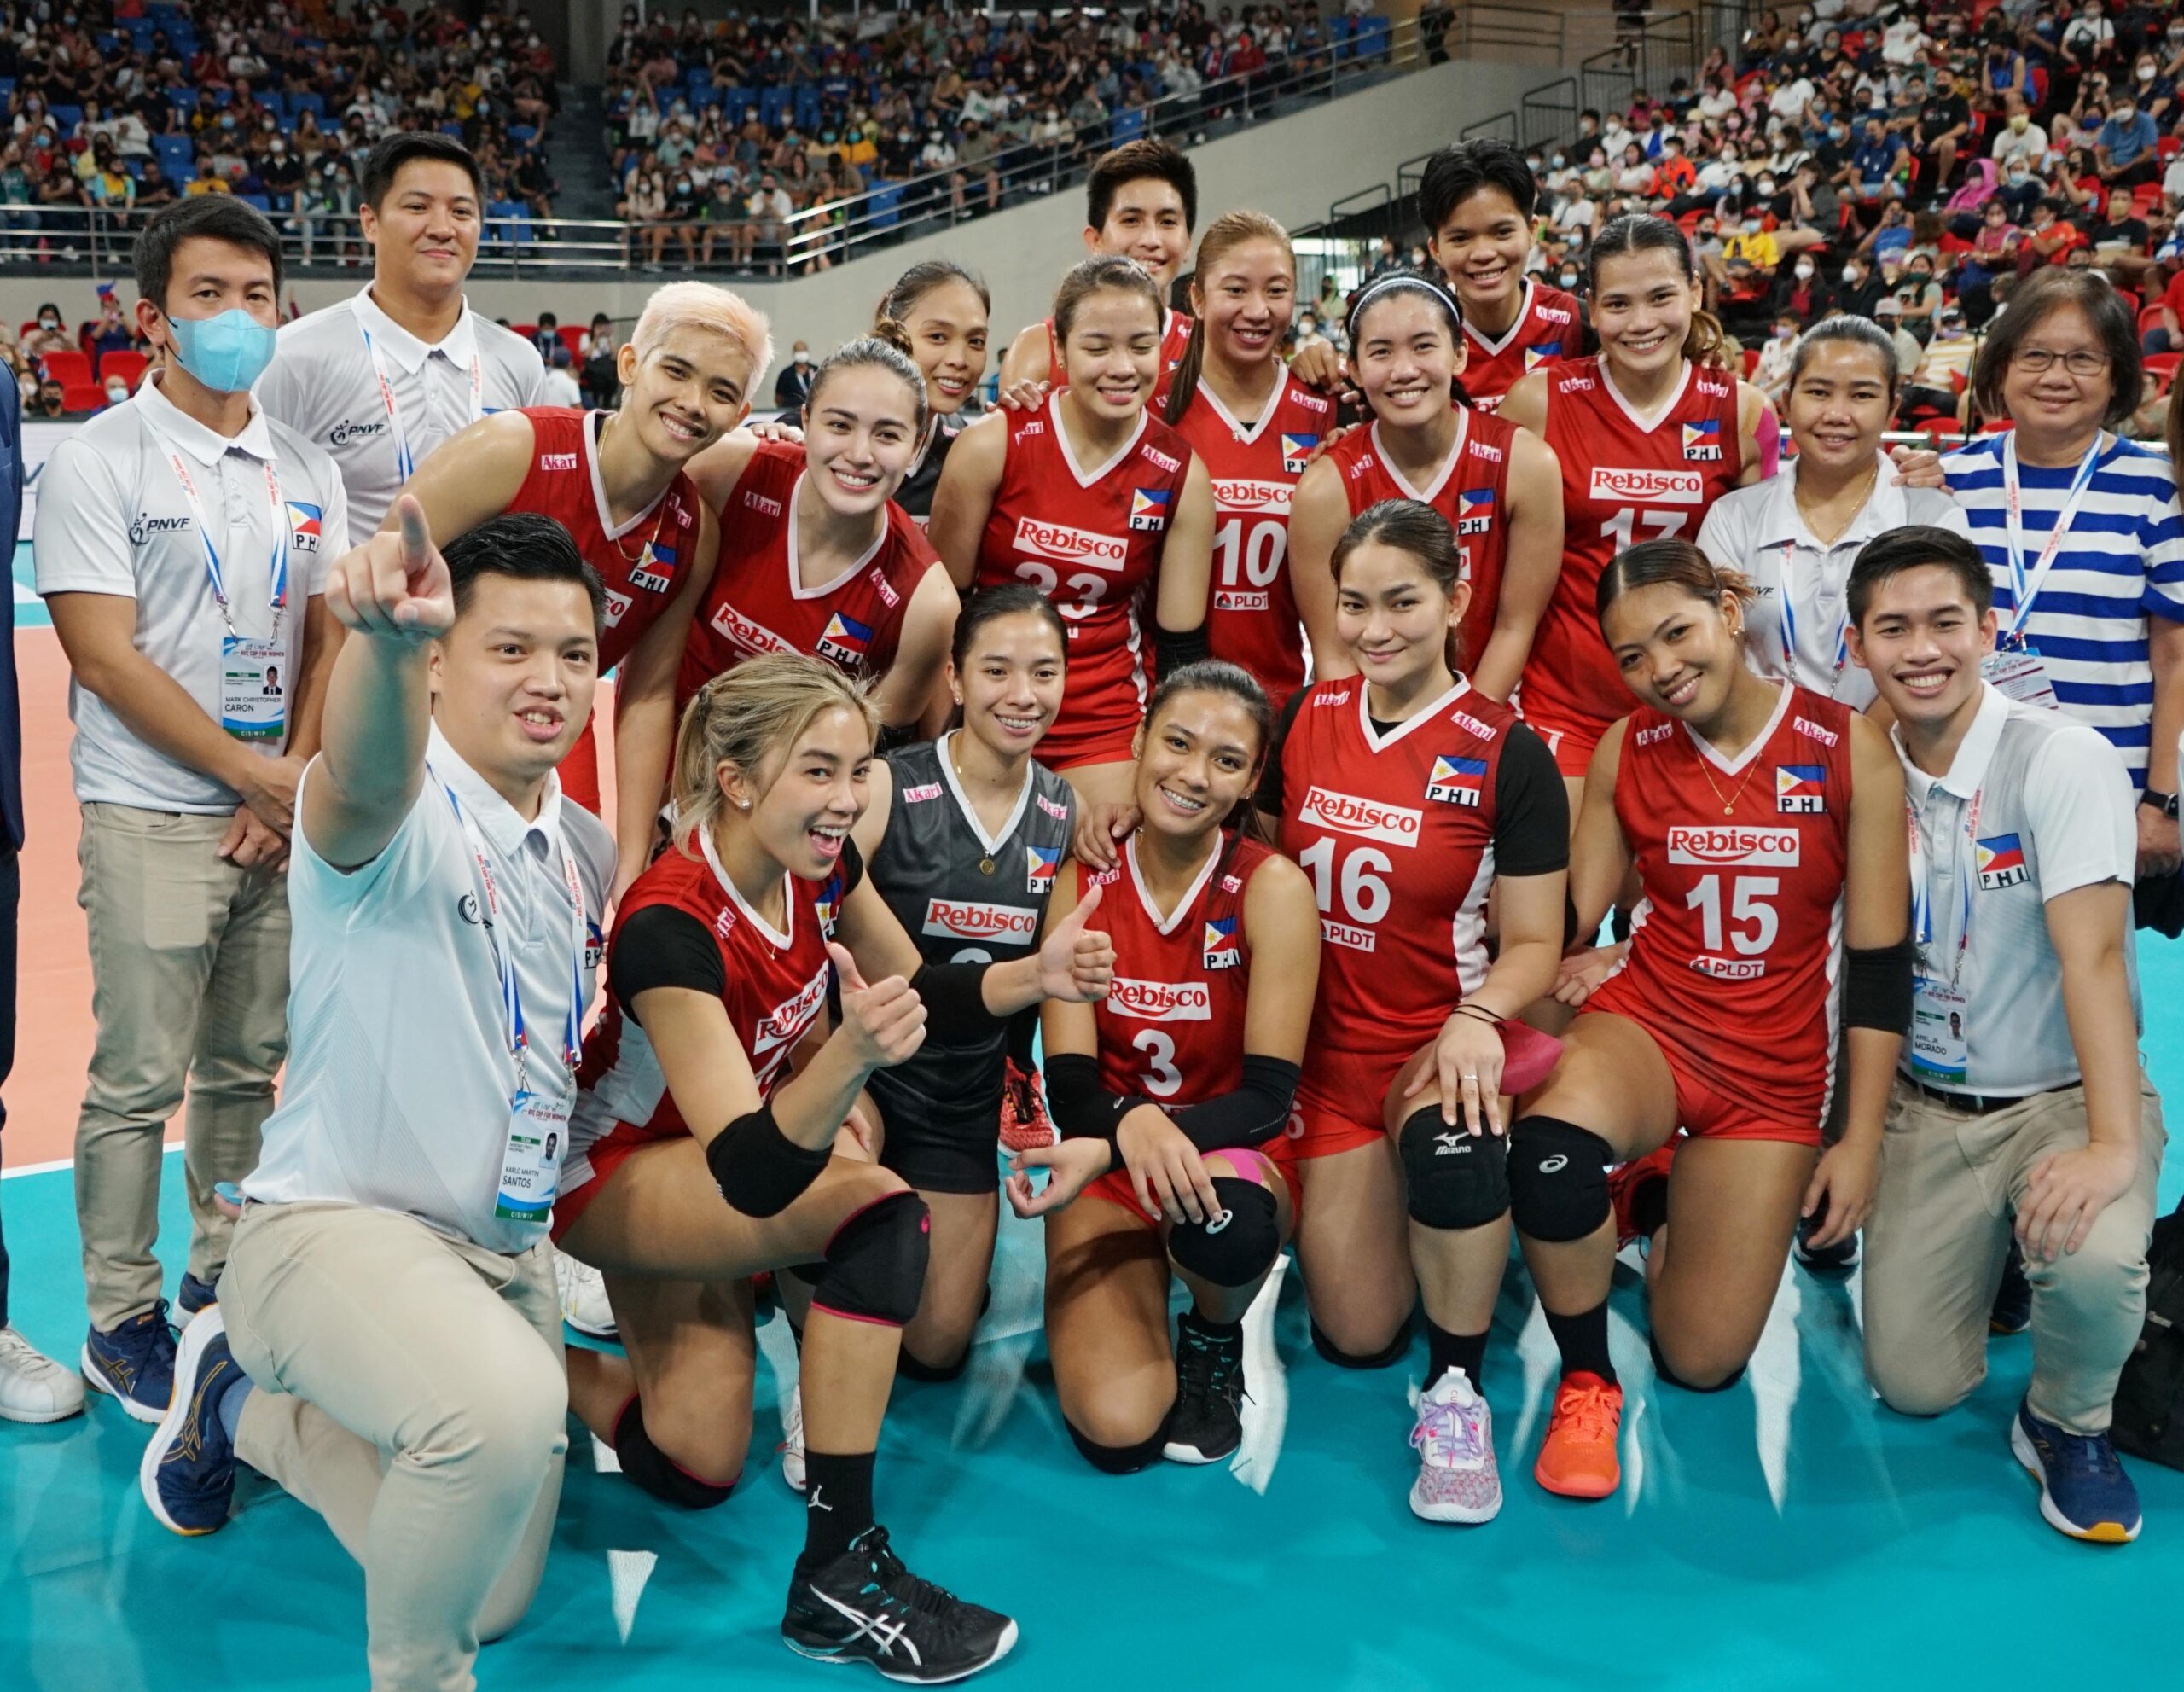 Weary Philippines falls in Taiwan sweep, settles for best-ever AVC finish at 6th